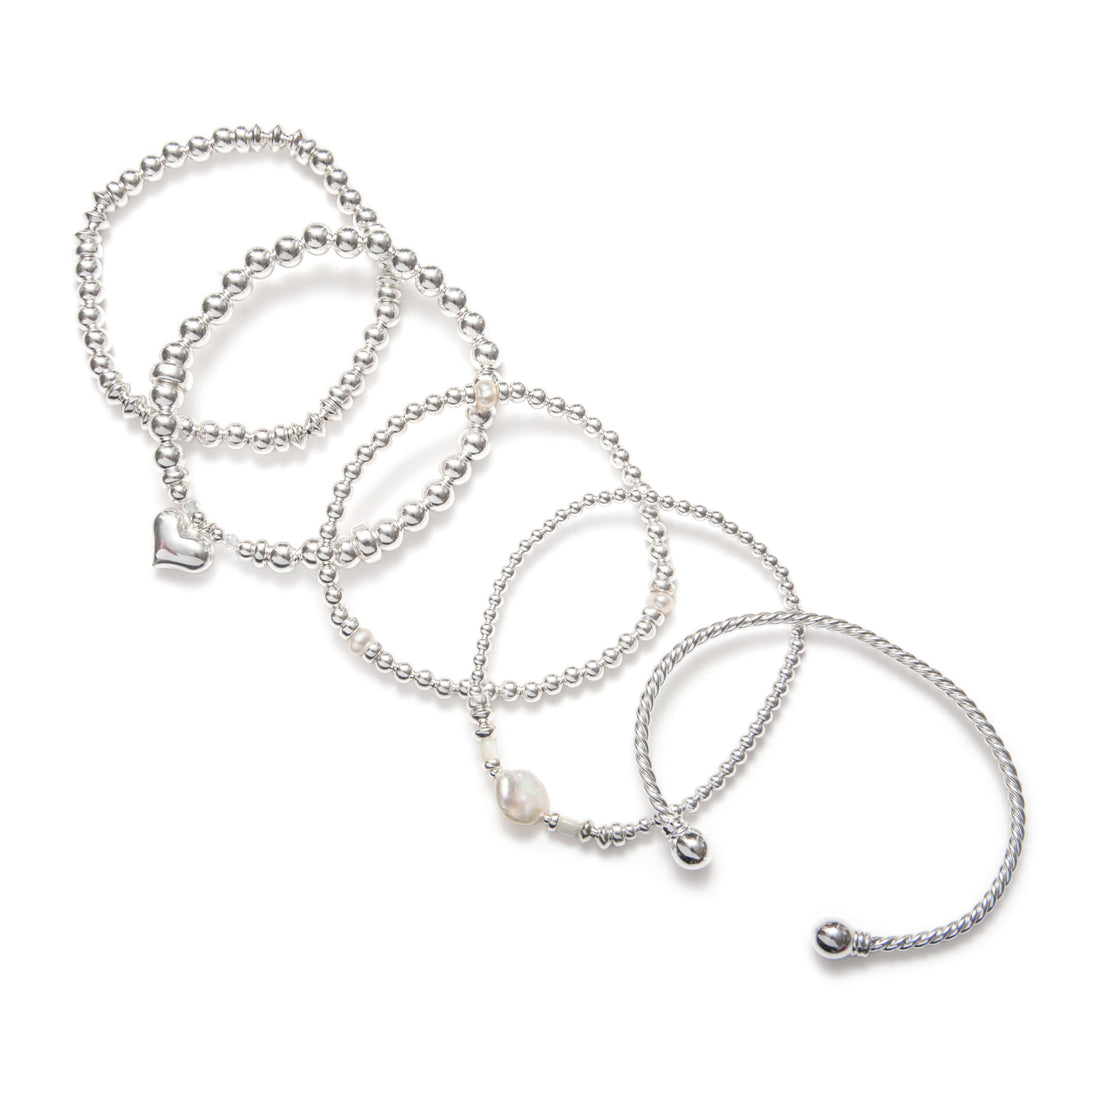 Signature Set : Our Essentials in Sterling Silver